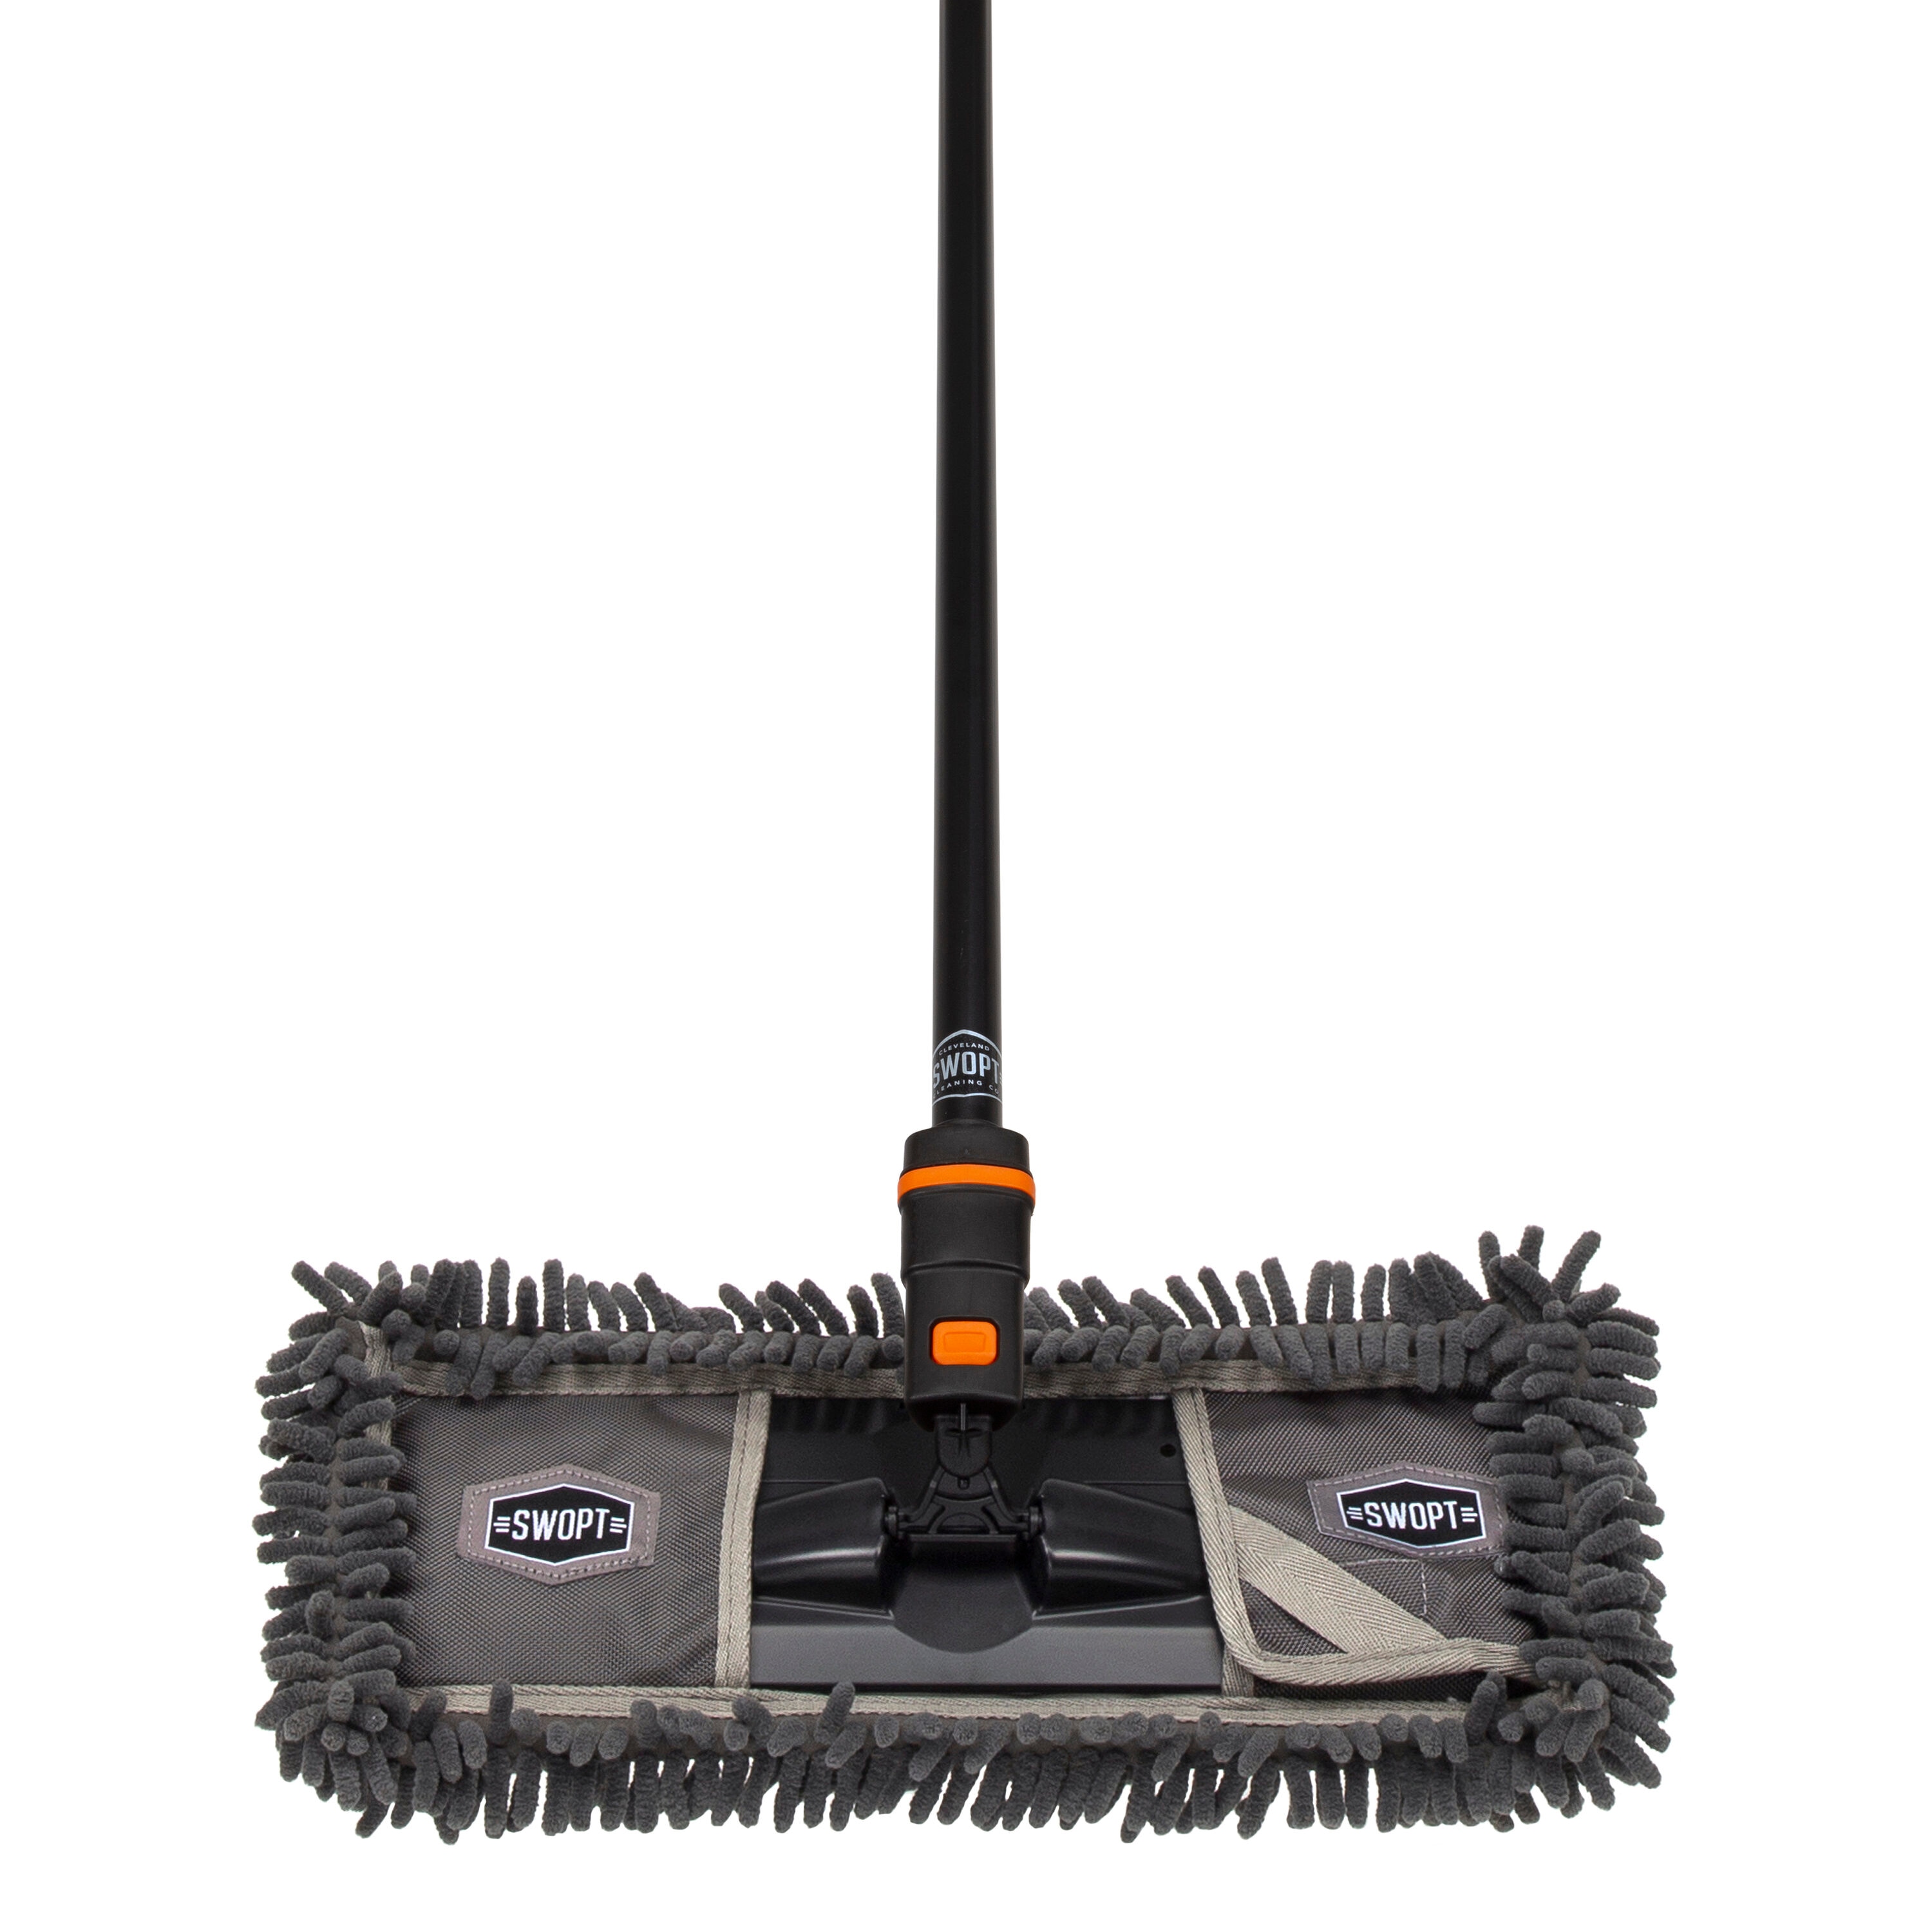 This Best-Selling Spray Mop Is Just $19 Today at